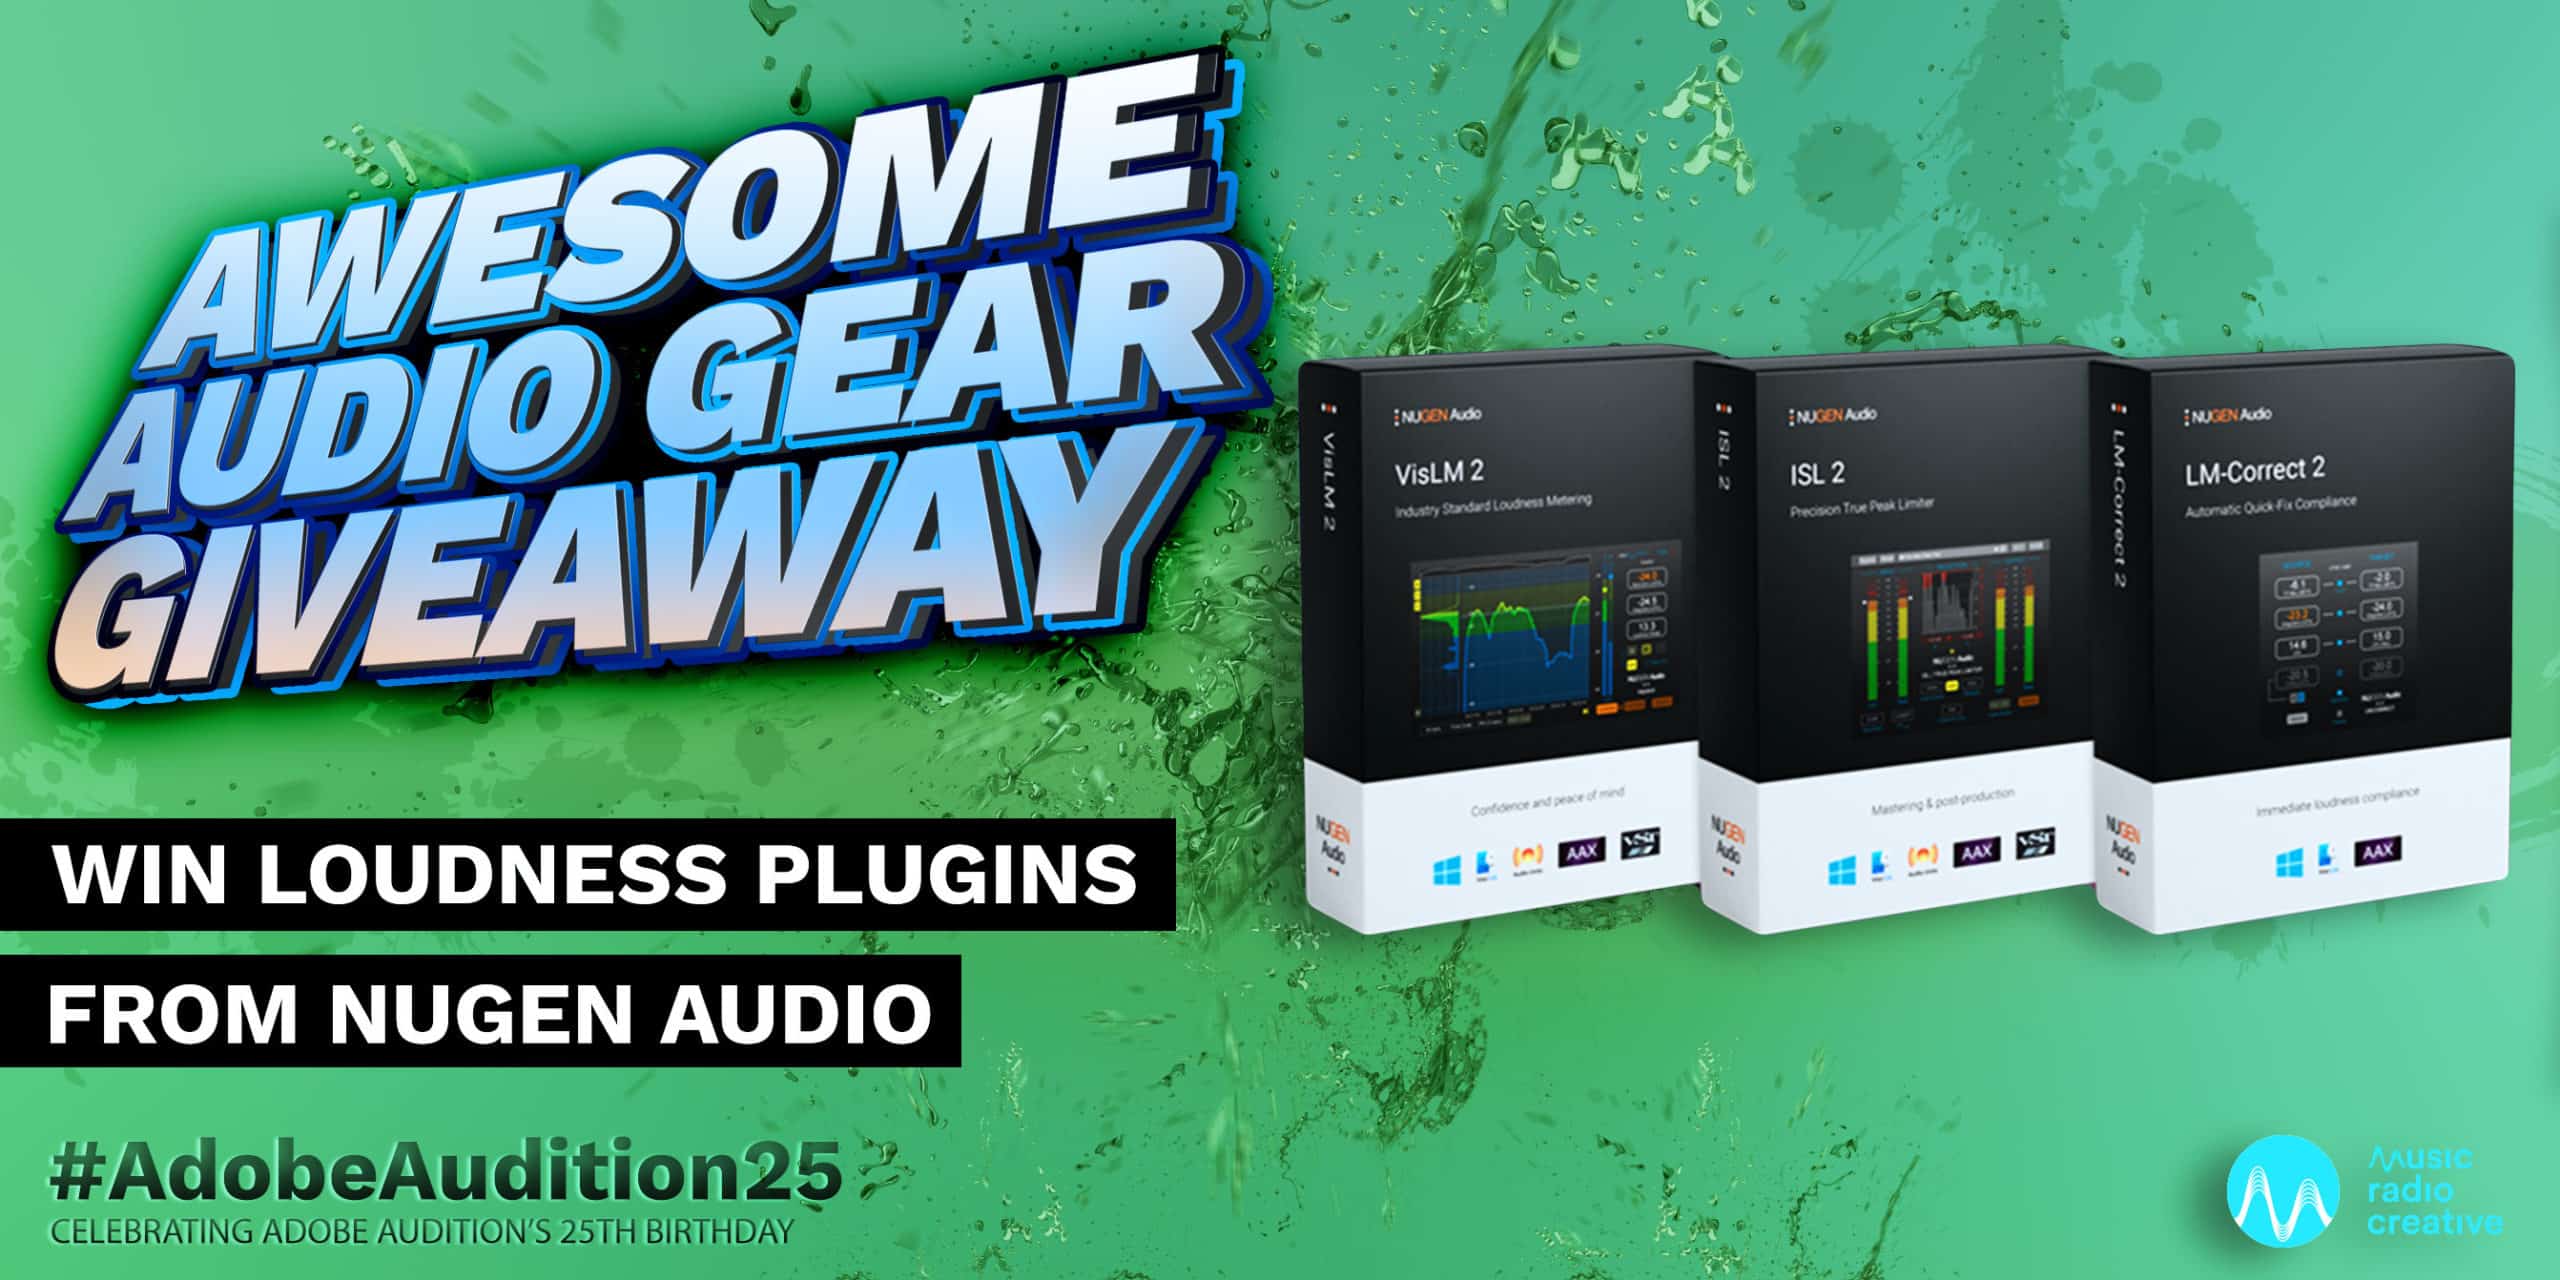 Win Loudness Plugins from NUGEN Audio Awesome Audio Gear Giveaway  Music Radio Creative